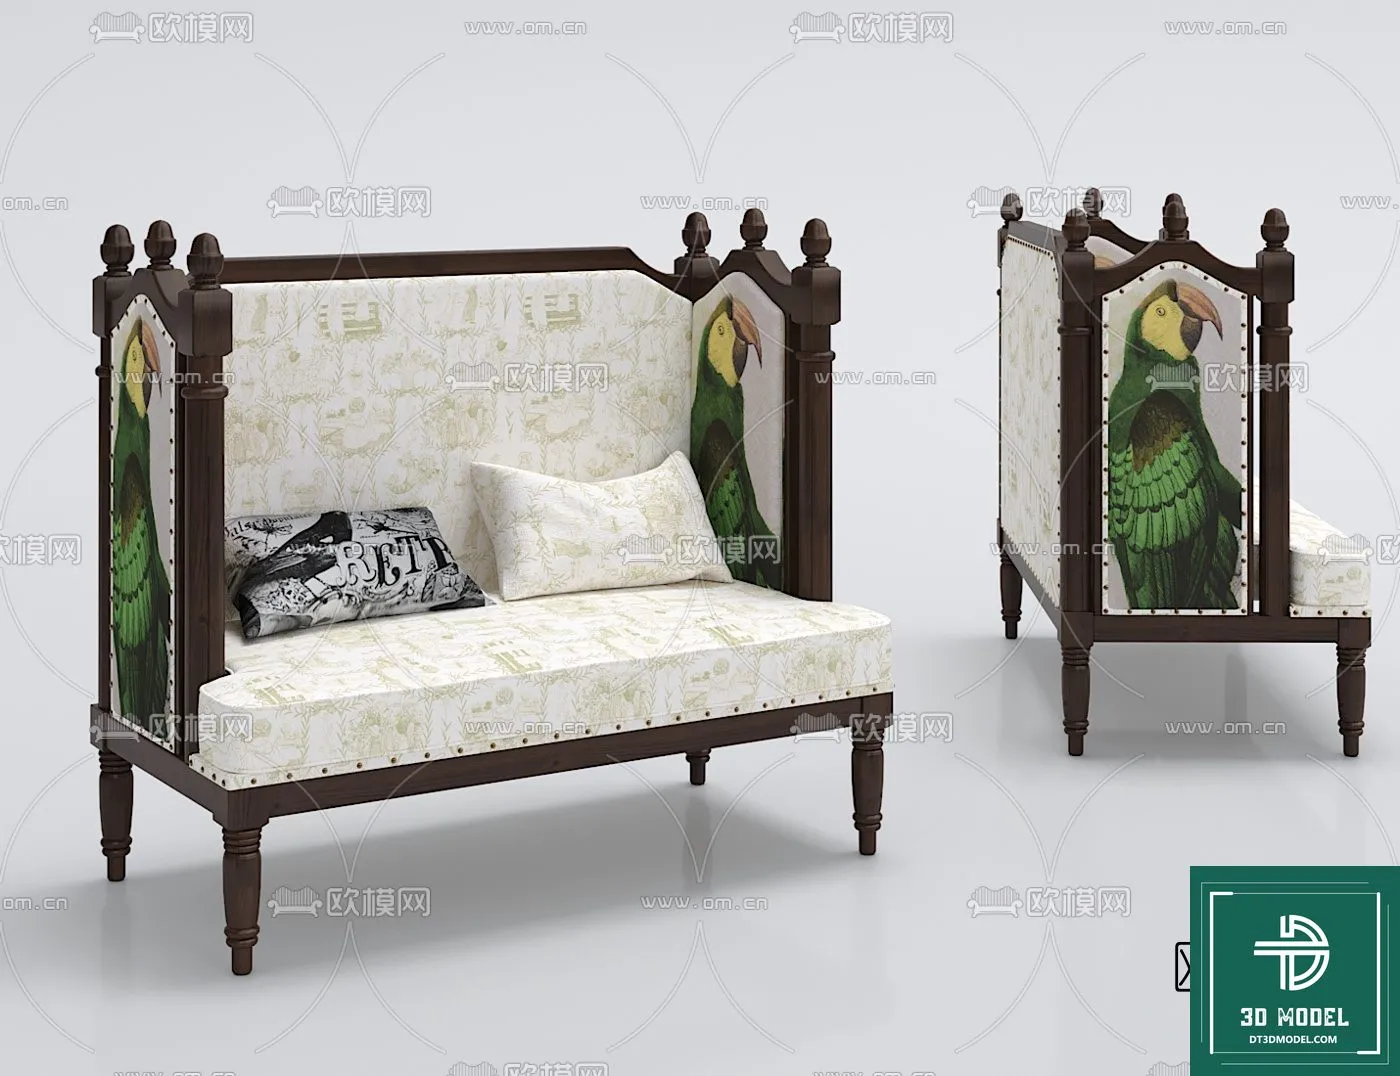 INDOCHINE STYLE – 3D MODELS – 026